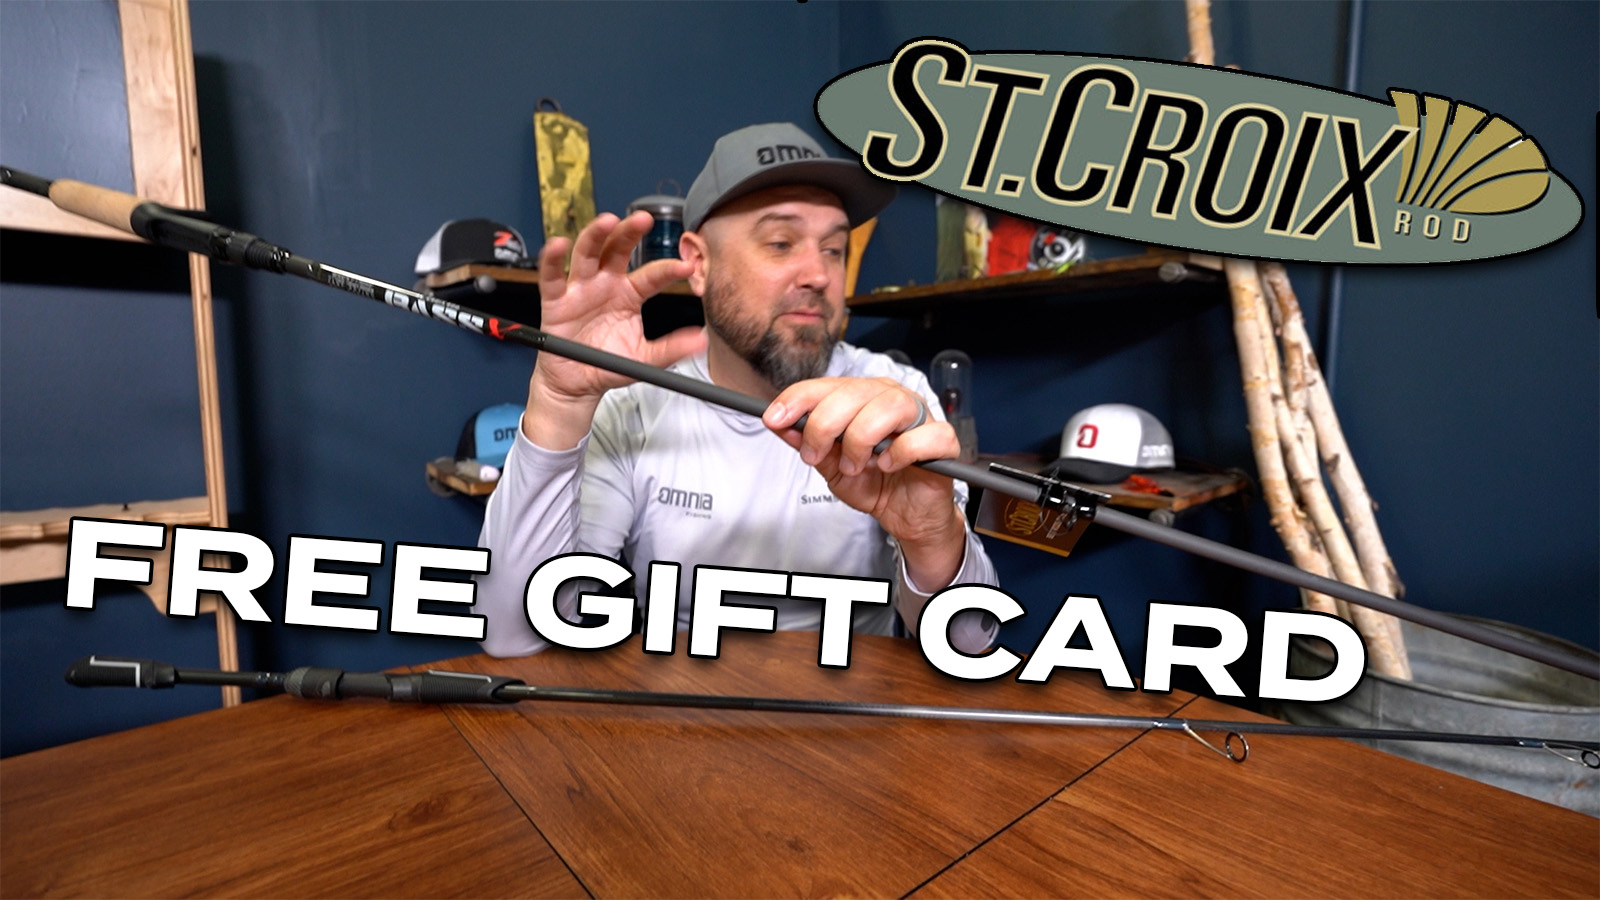 Get a Free Gift Card When You Buy Bass X or Physyx By St Croix!